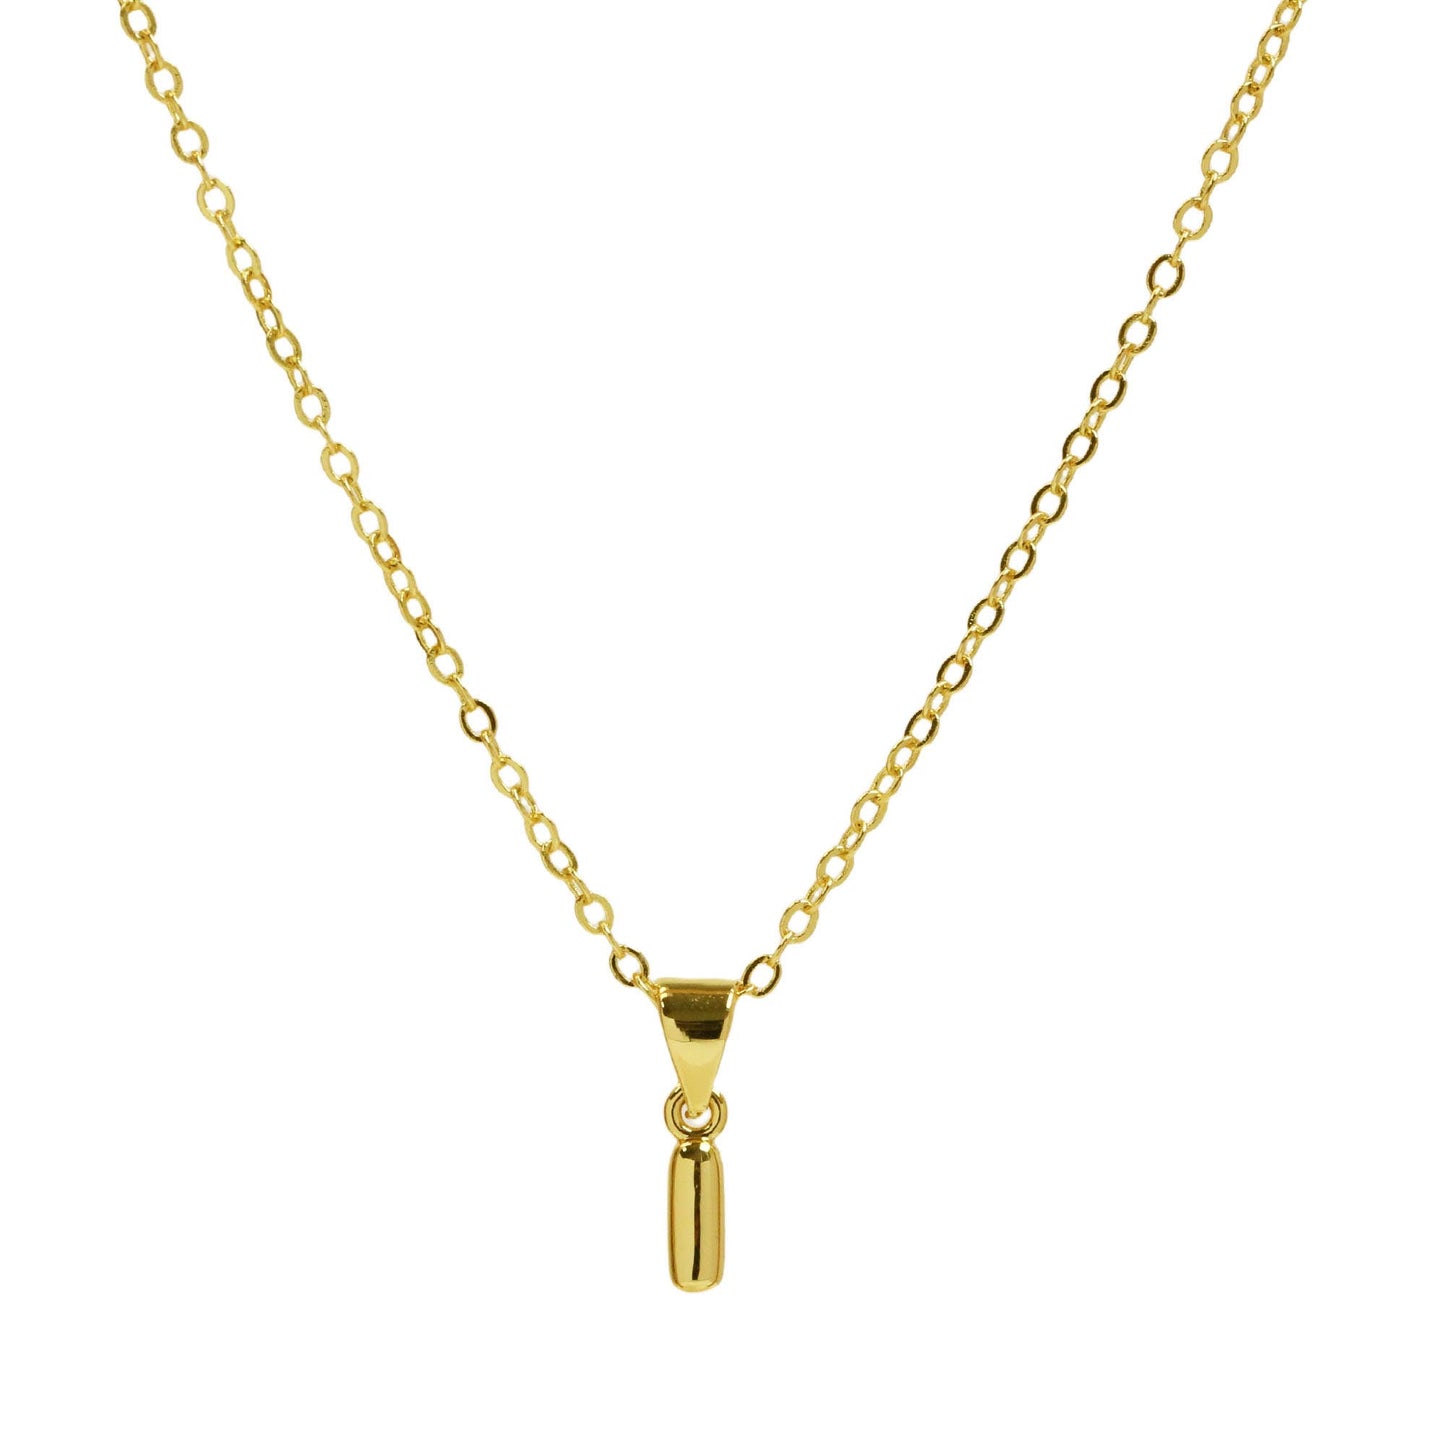 Initial Mini Balloon Bubble 18K Gold Necklace: H